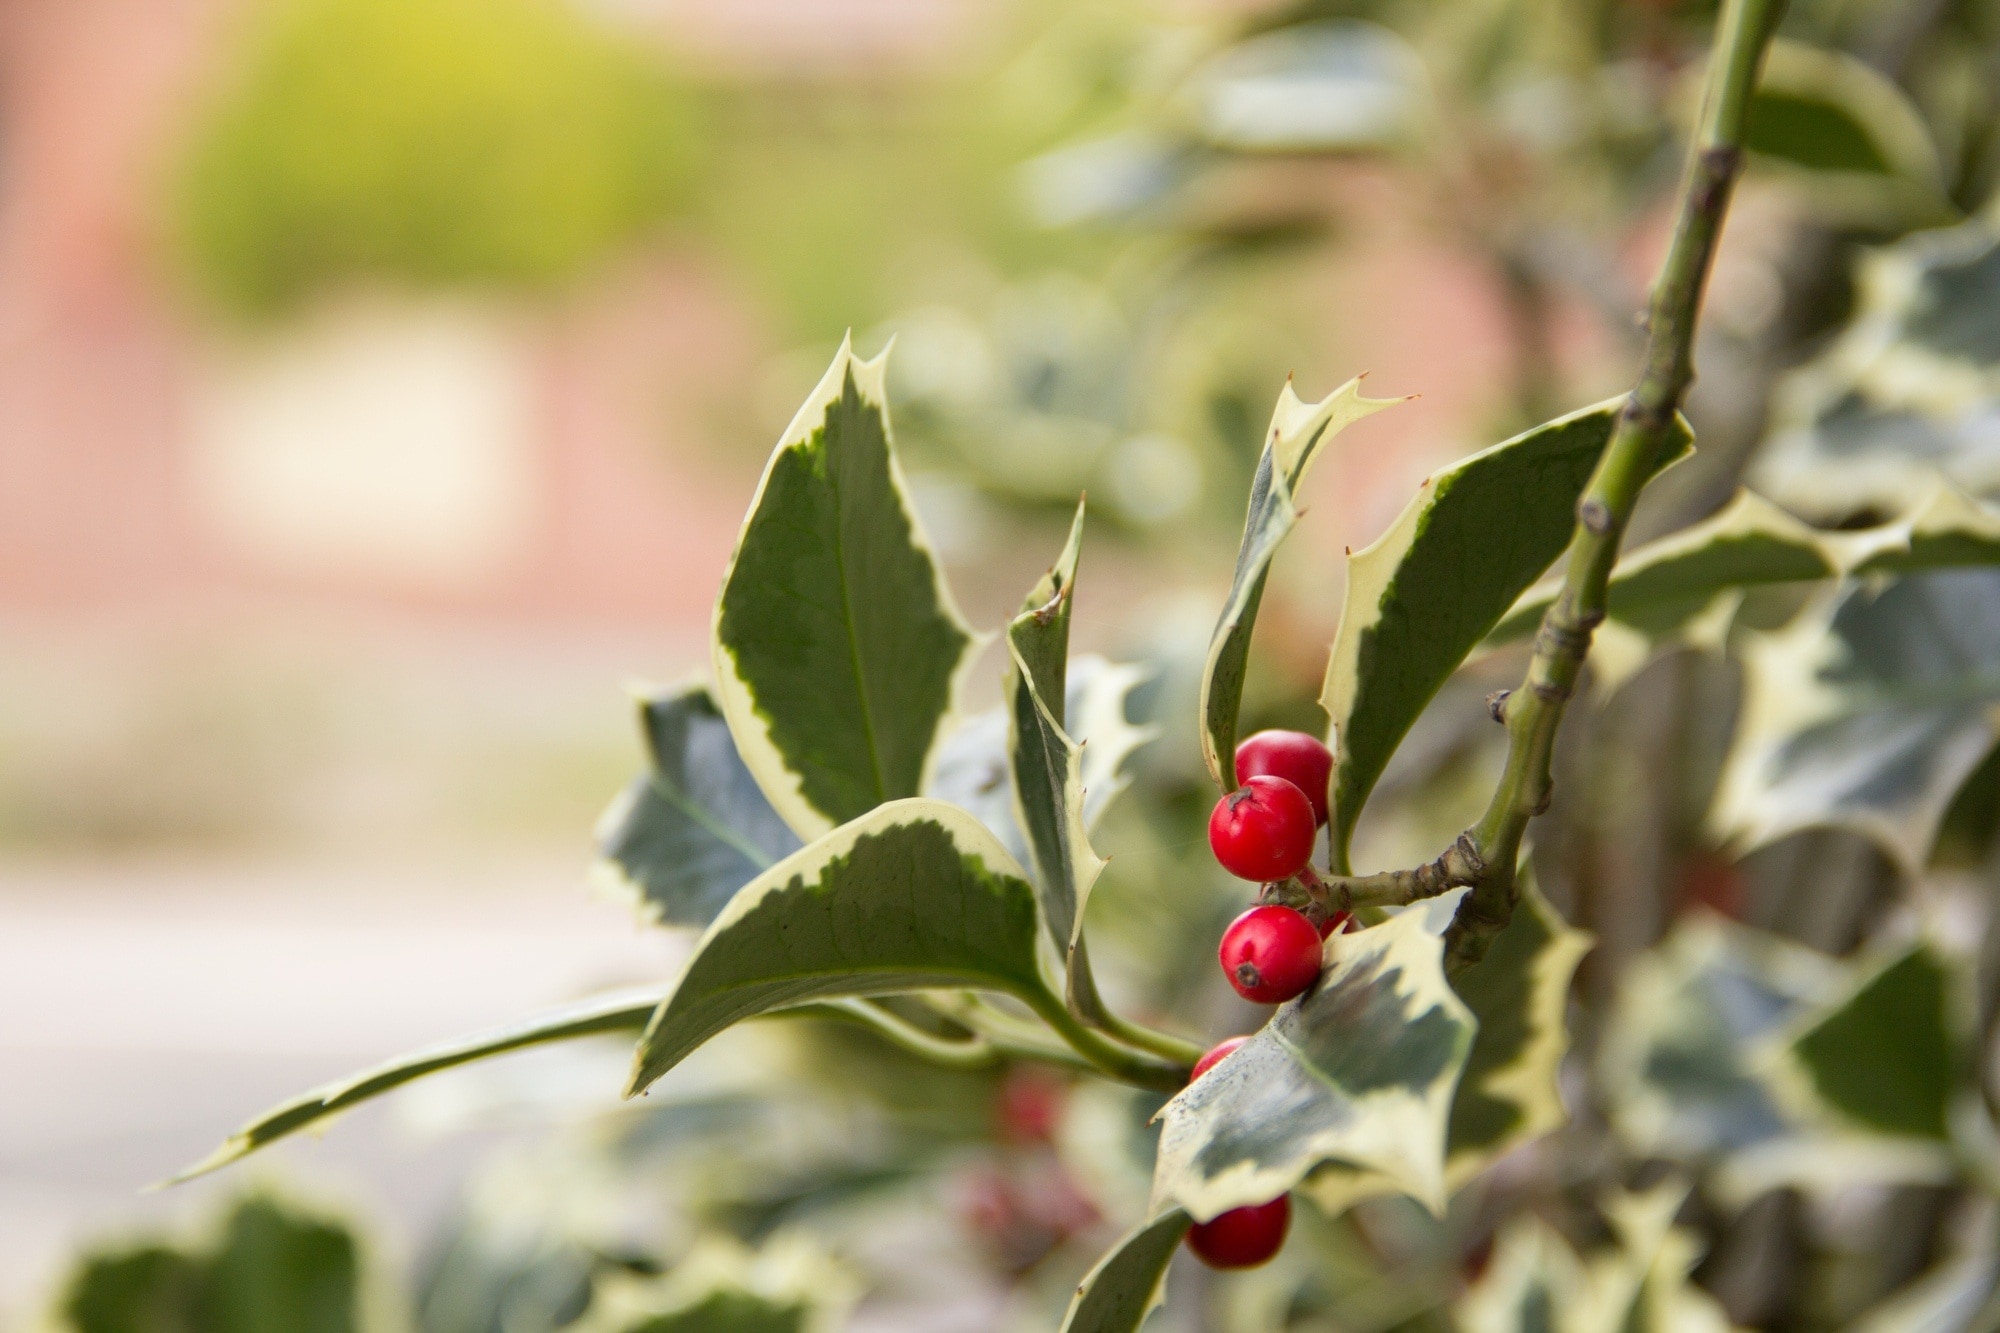 Xmas, December, Holly, Leaves, leaf, outdoors